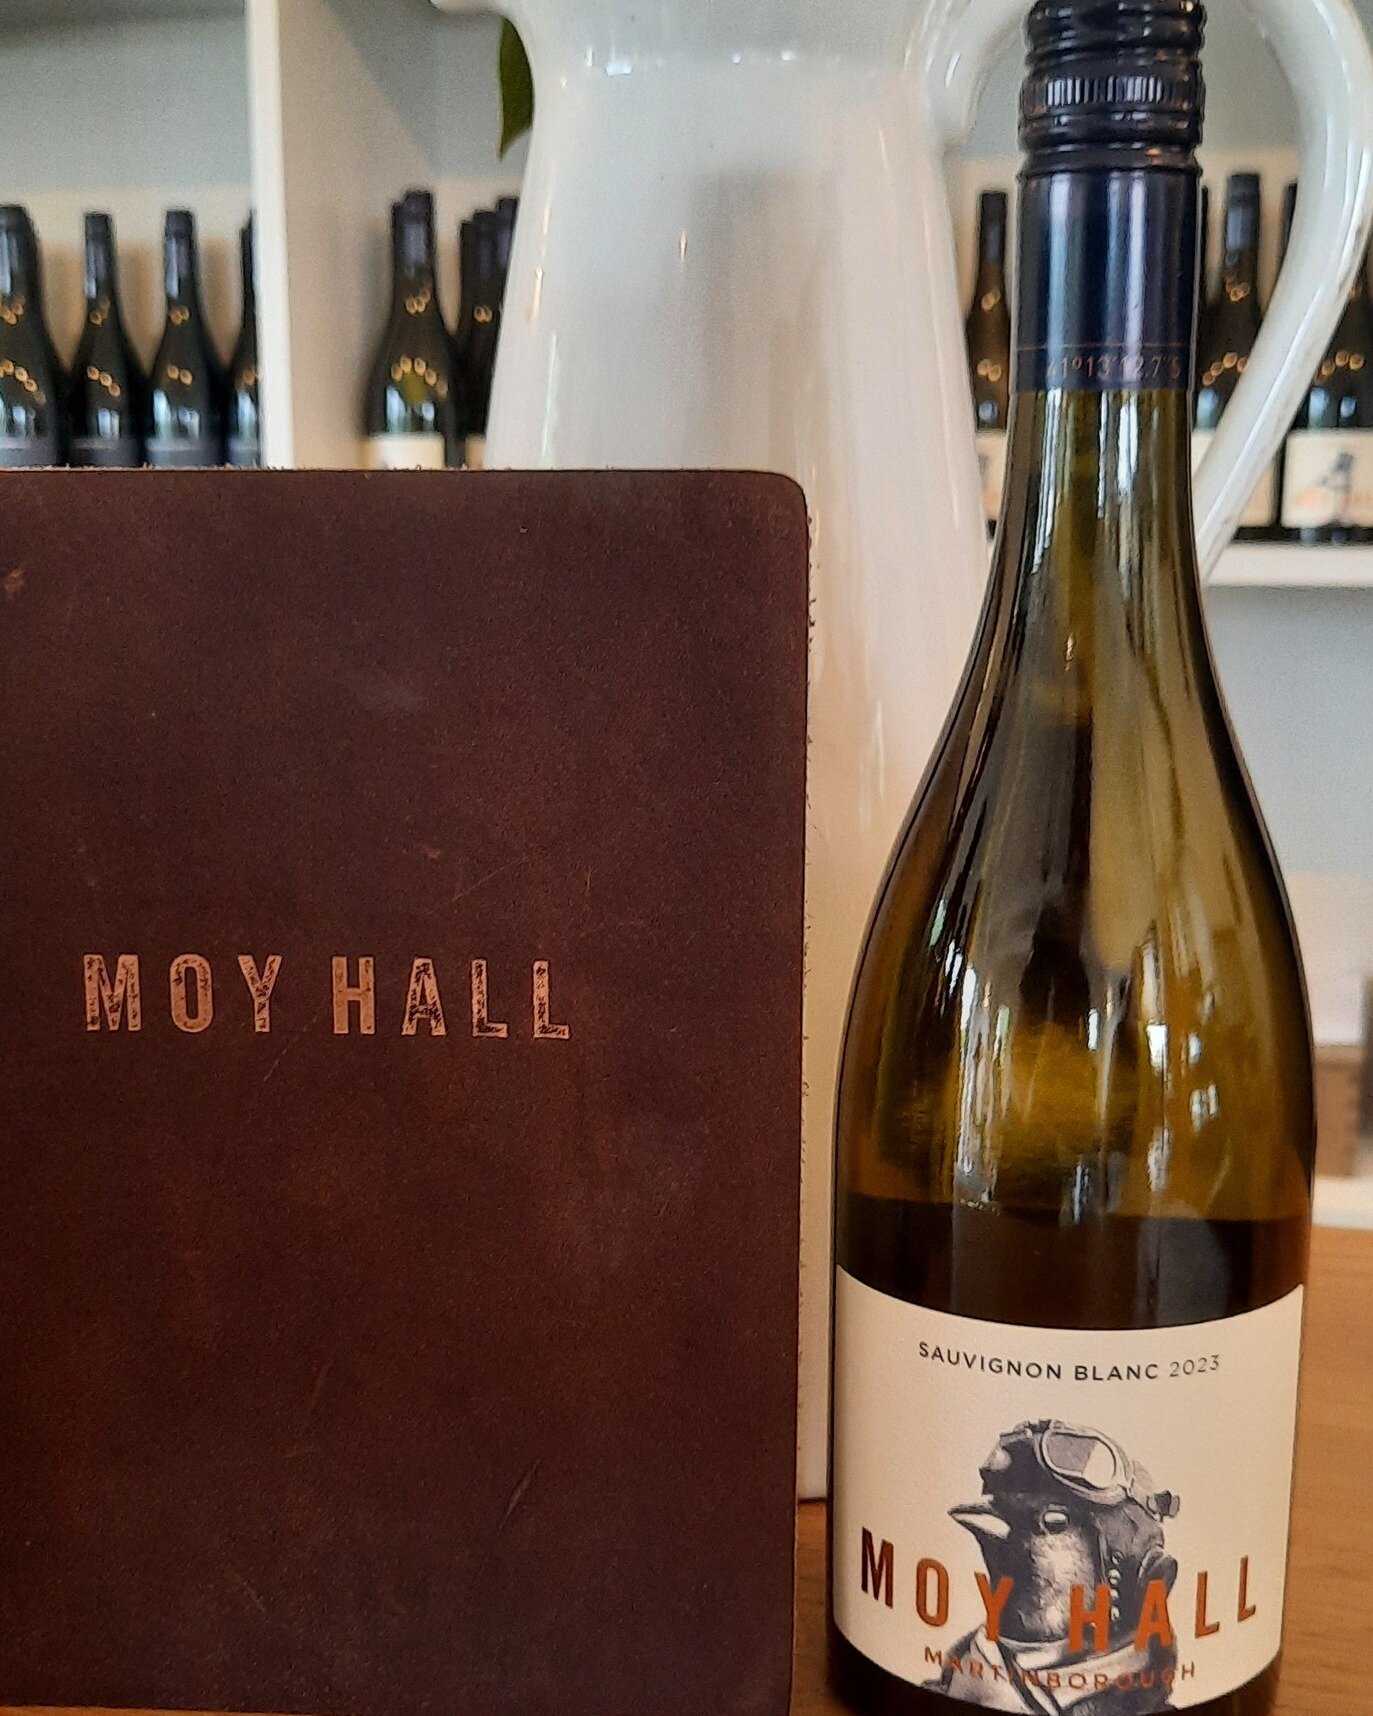 January 2024 Wine of the Month:
Better late than never with our first Wine of the Month winner for 2024! Moy Hall Wines going back to back with their 2023 Sauvignon Blanc for January 2024 after taking the title in Dec 2023 as well. Obviously very pop